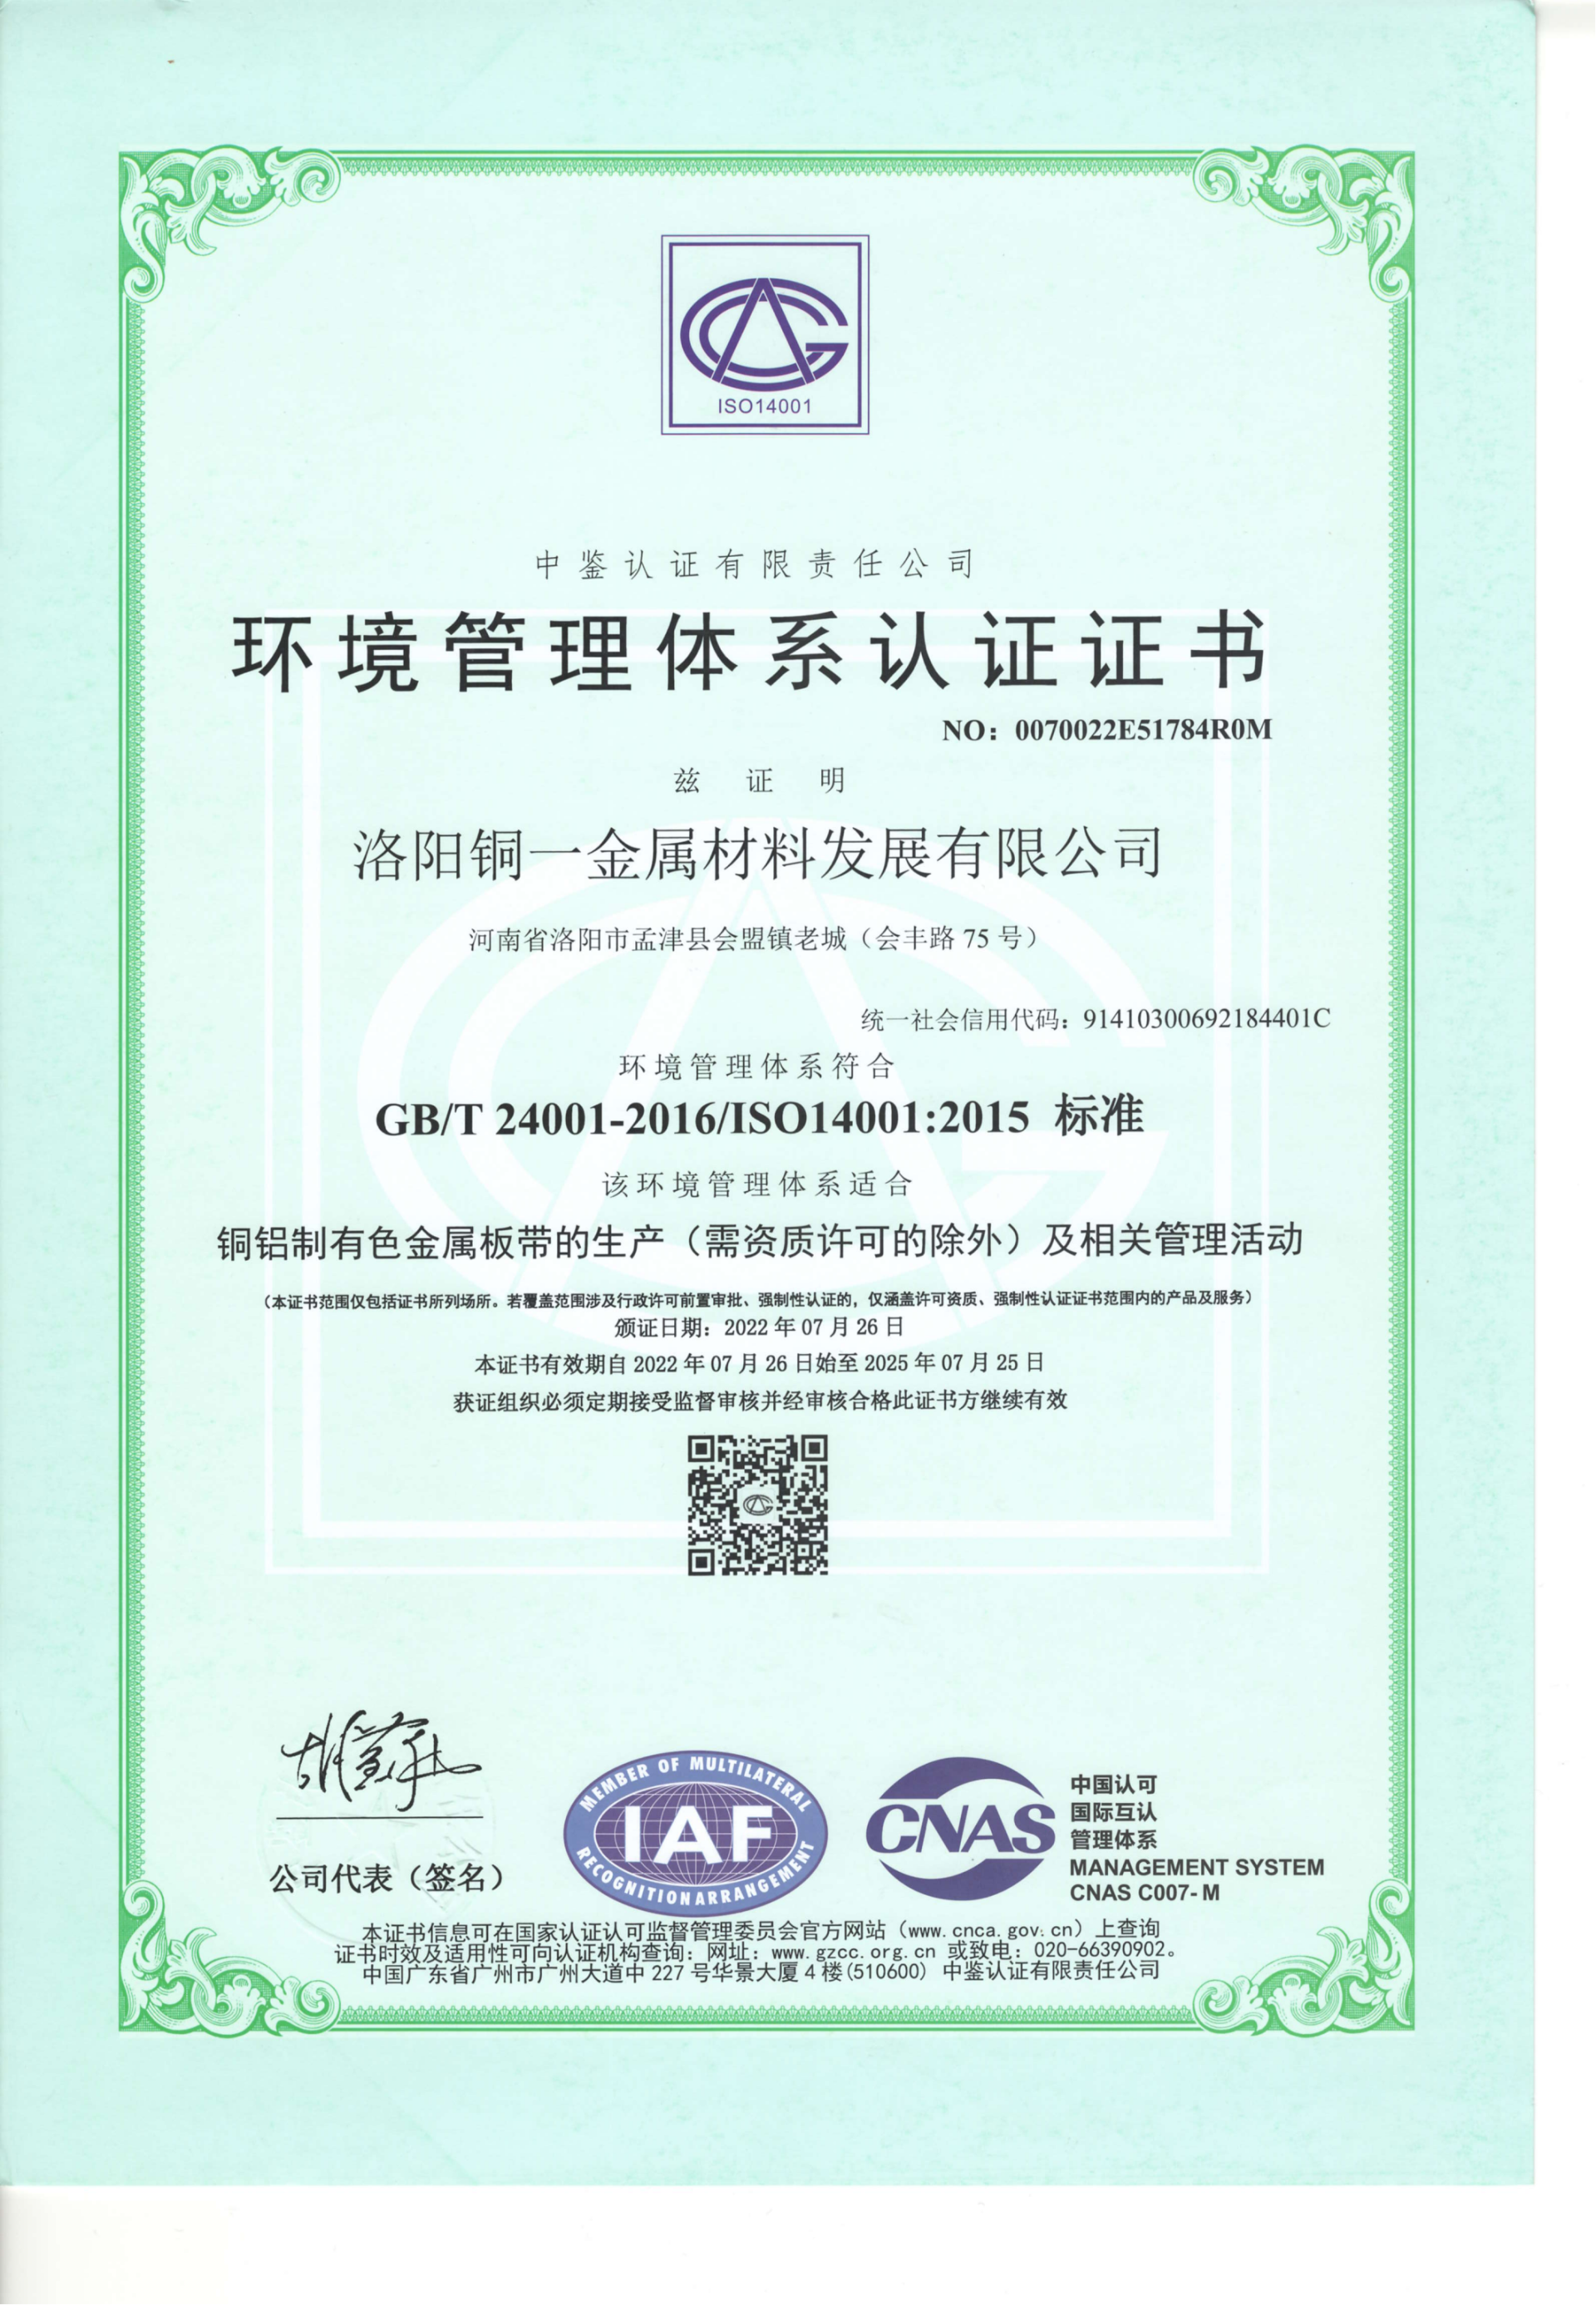 ISO 14001 Environmental Management System Certificate(Chinese)